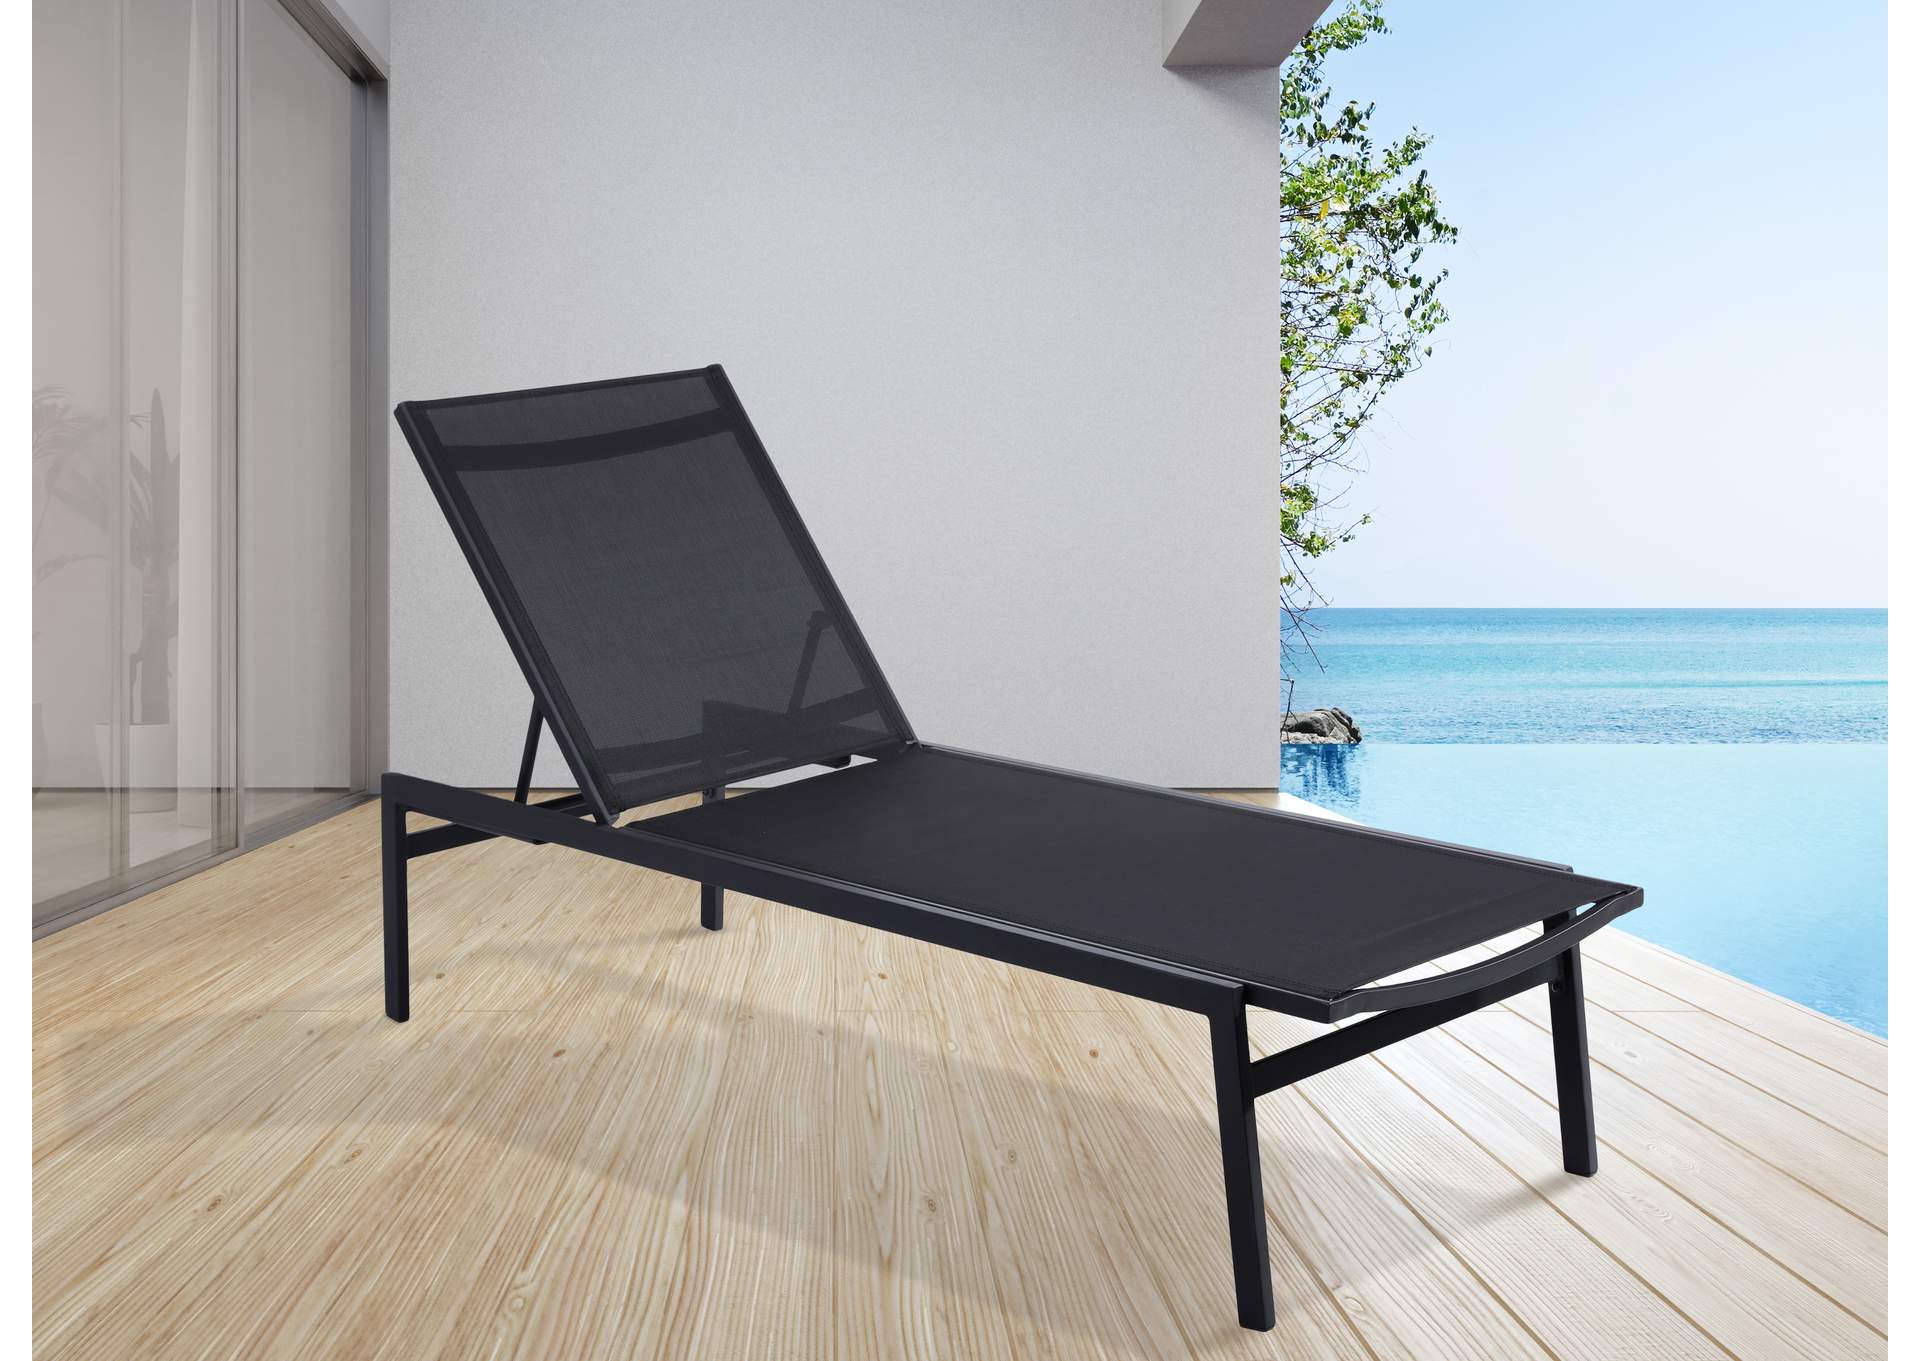 Santorini Black Resilient Mesh Water Resistant Fabric Outdoor Patio Aluminum Mesh Chaise Lounge Chair,Meridian Furniture